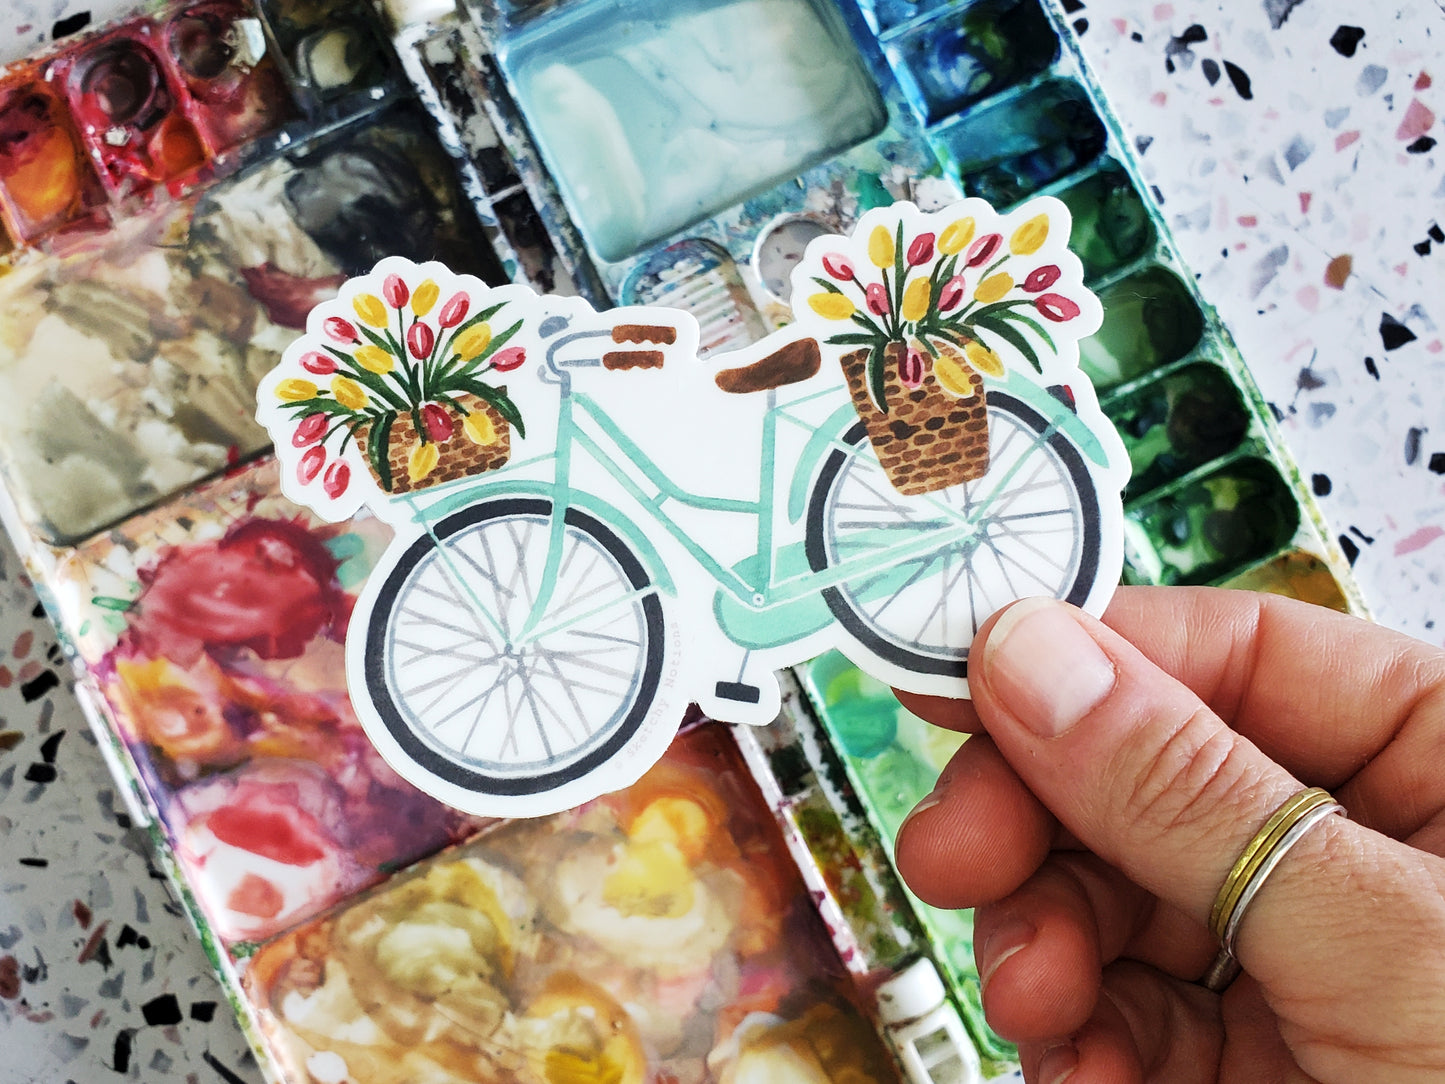 Mint Bicycle Sticker with Tulips